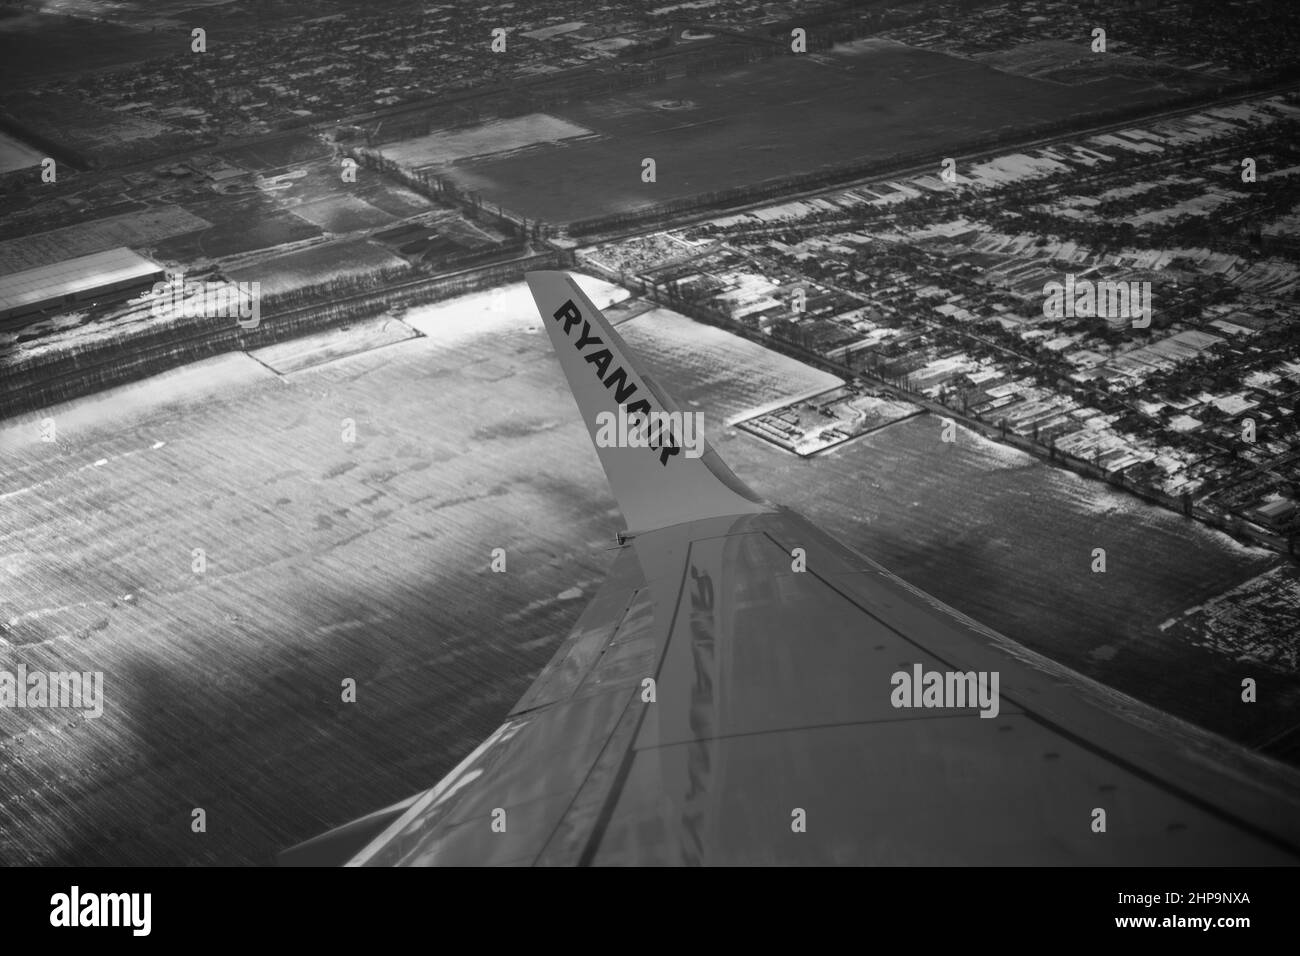 KIEV, UKRAINE - OCTOBER 11, 2022: The wing of the aircraft with the inscription Ryanair in the air autdoor Stock Photo